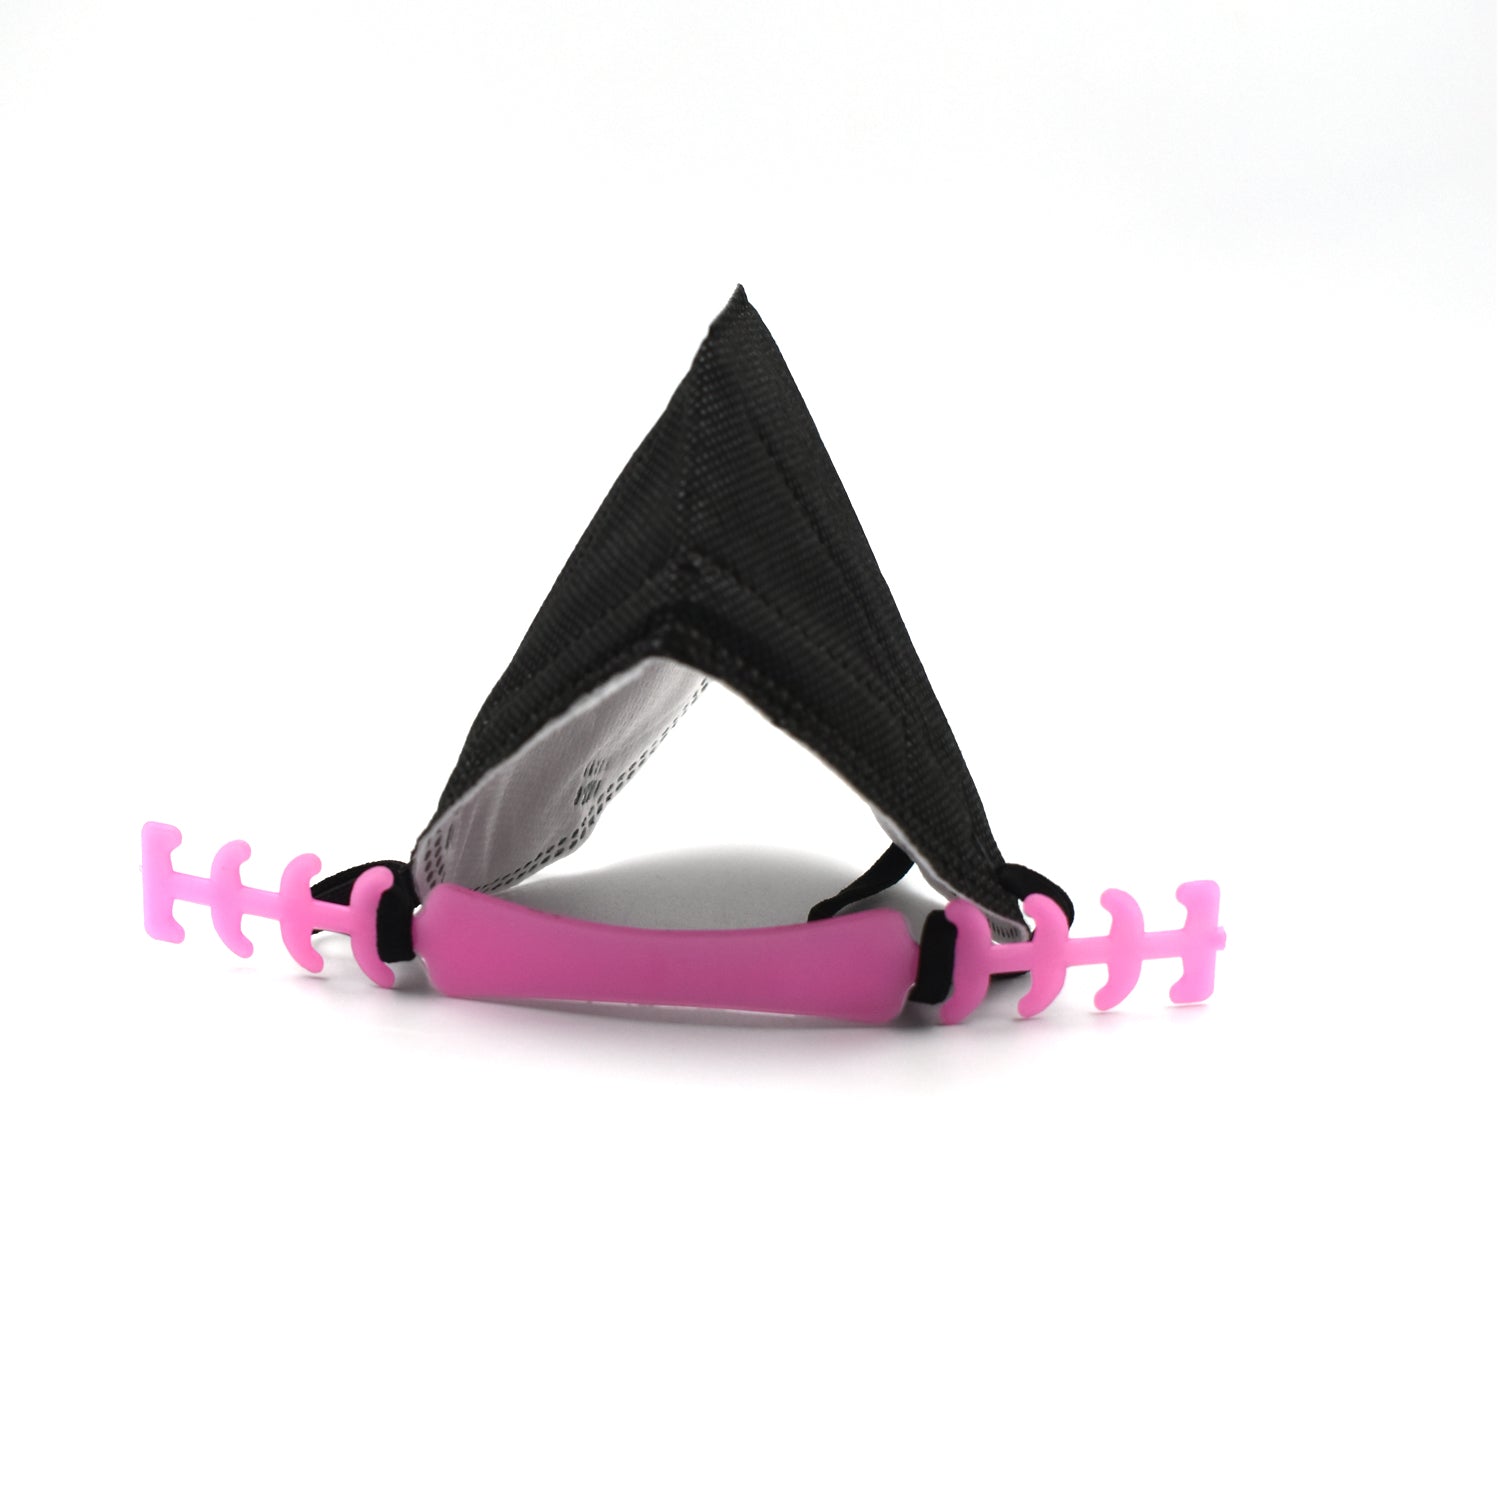 6106 Mask Extension Belt and strap Used for extended face mask string to get rid from pain in ear. DeoDap